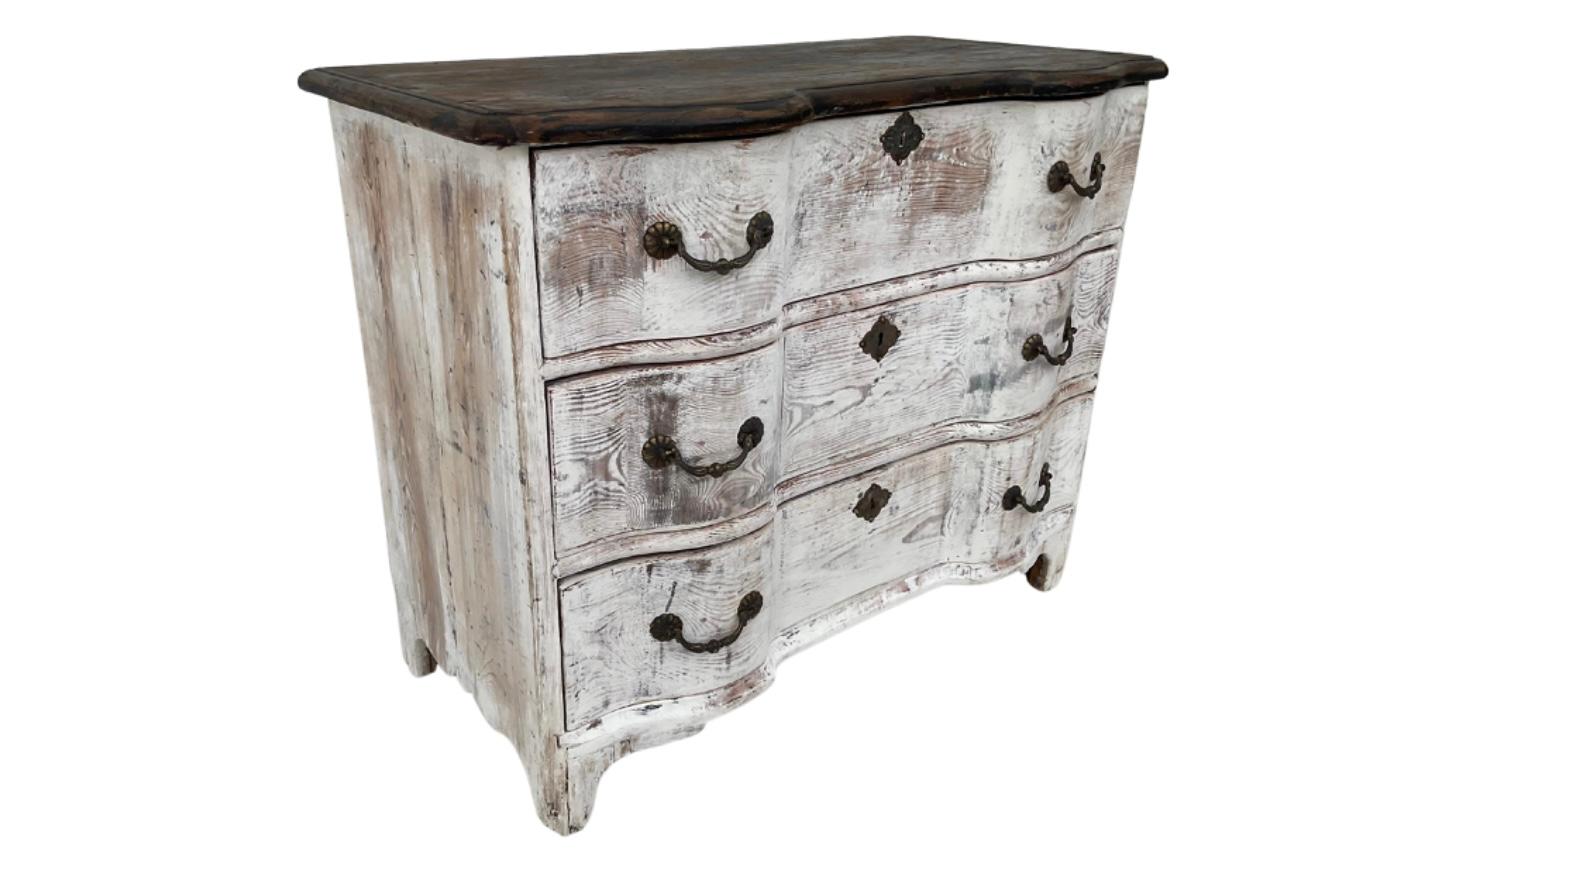 This is a beautiful Dutch Rococo commode, circa 1760 in white wash paint with original bronze hardware. The commode has a double serpentine front, shaped top, and scalloped apron. There are three spacious drawers with plenty of storage options. Faux